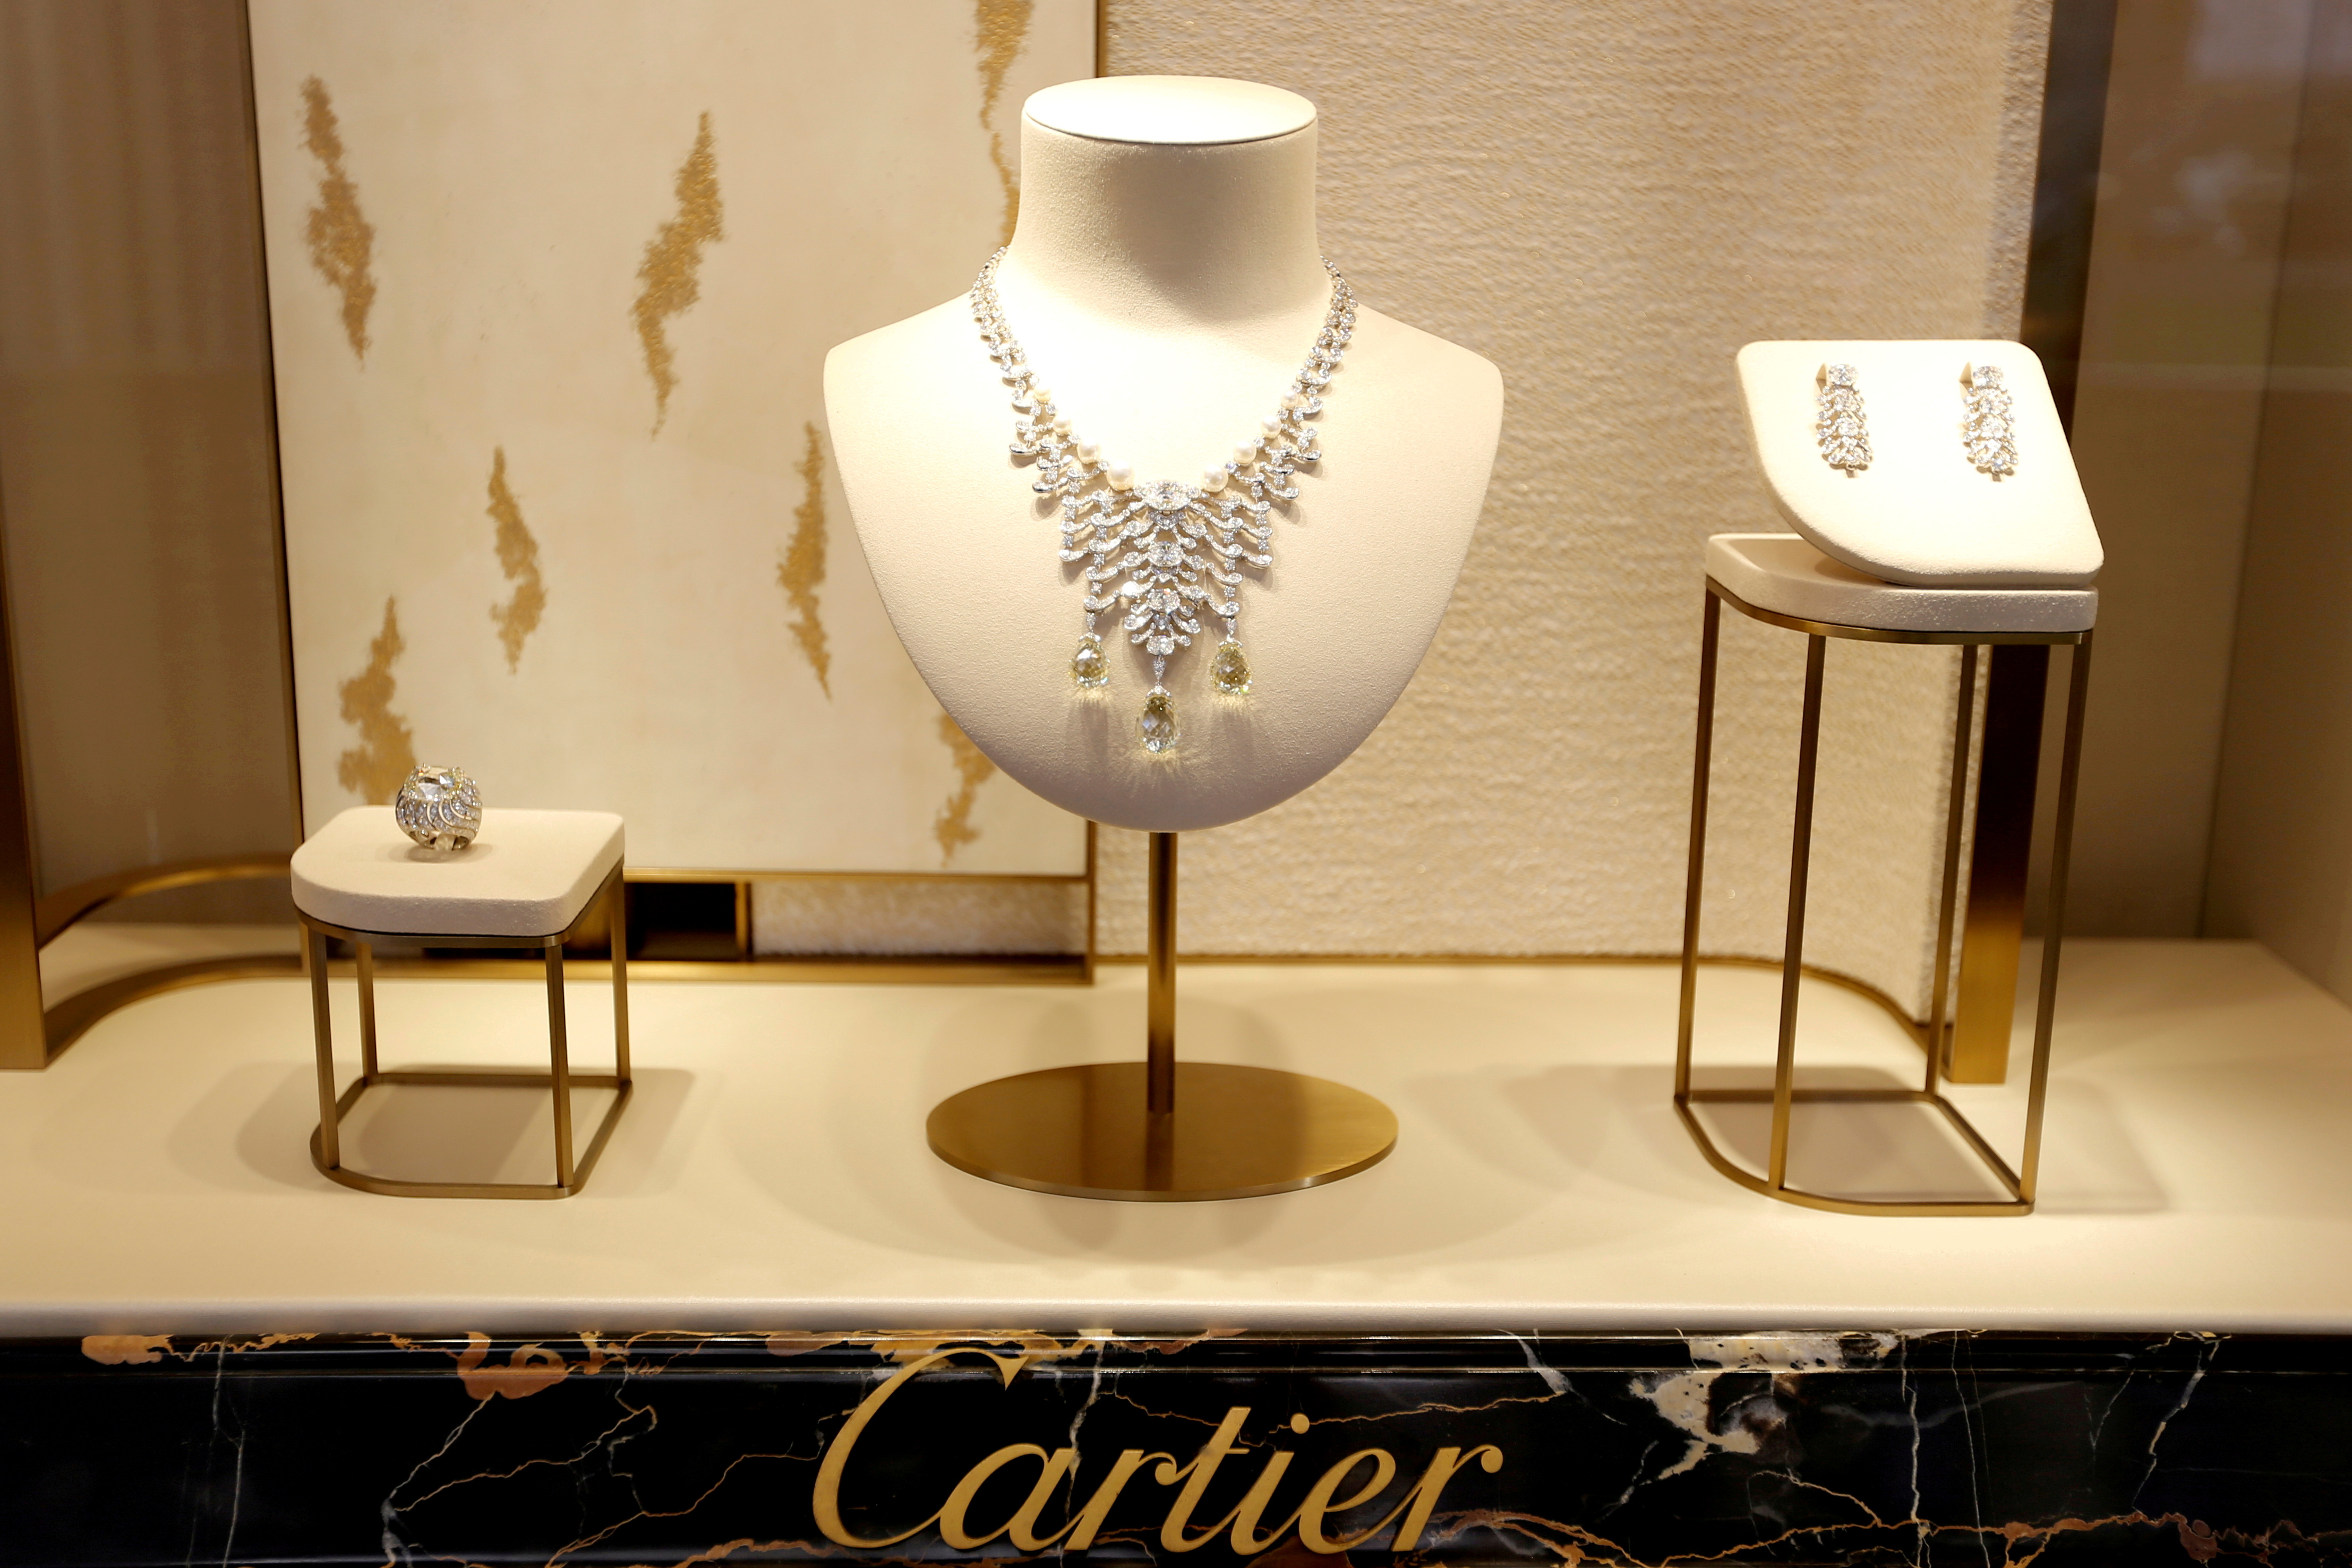 High-end jewellery displayed at a Cartier store on Place Vendome in Paris